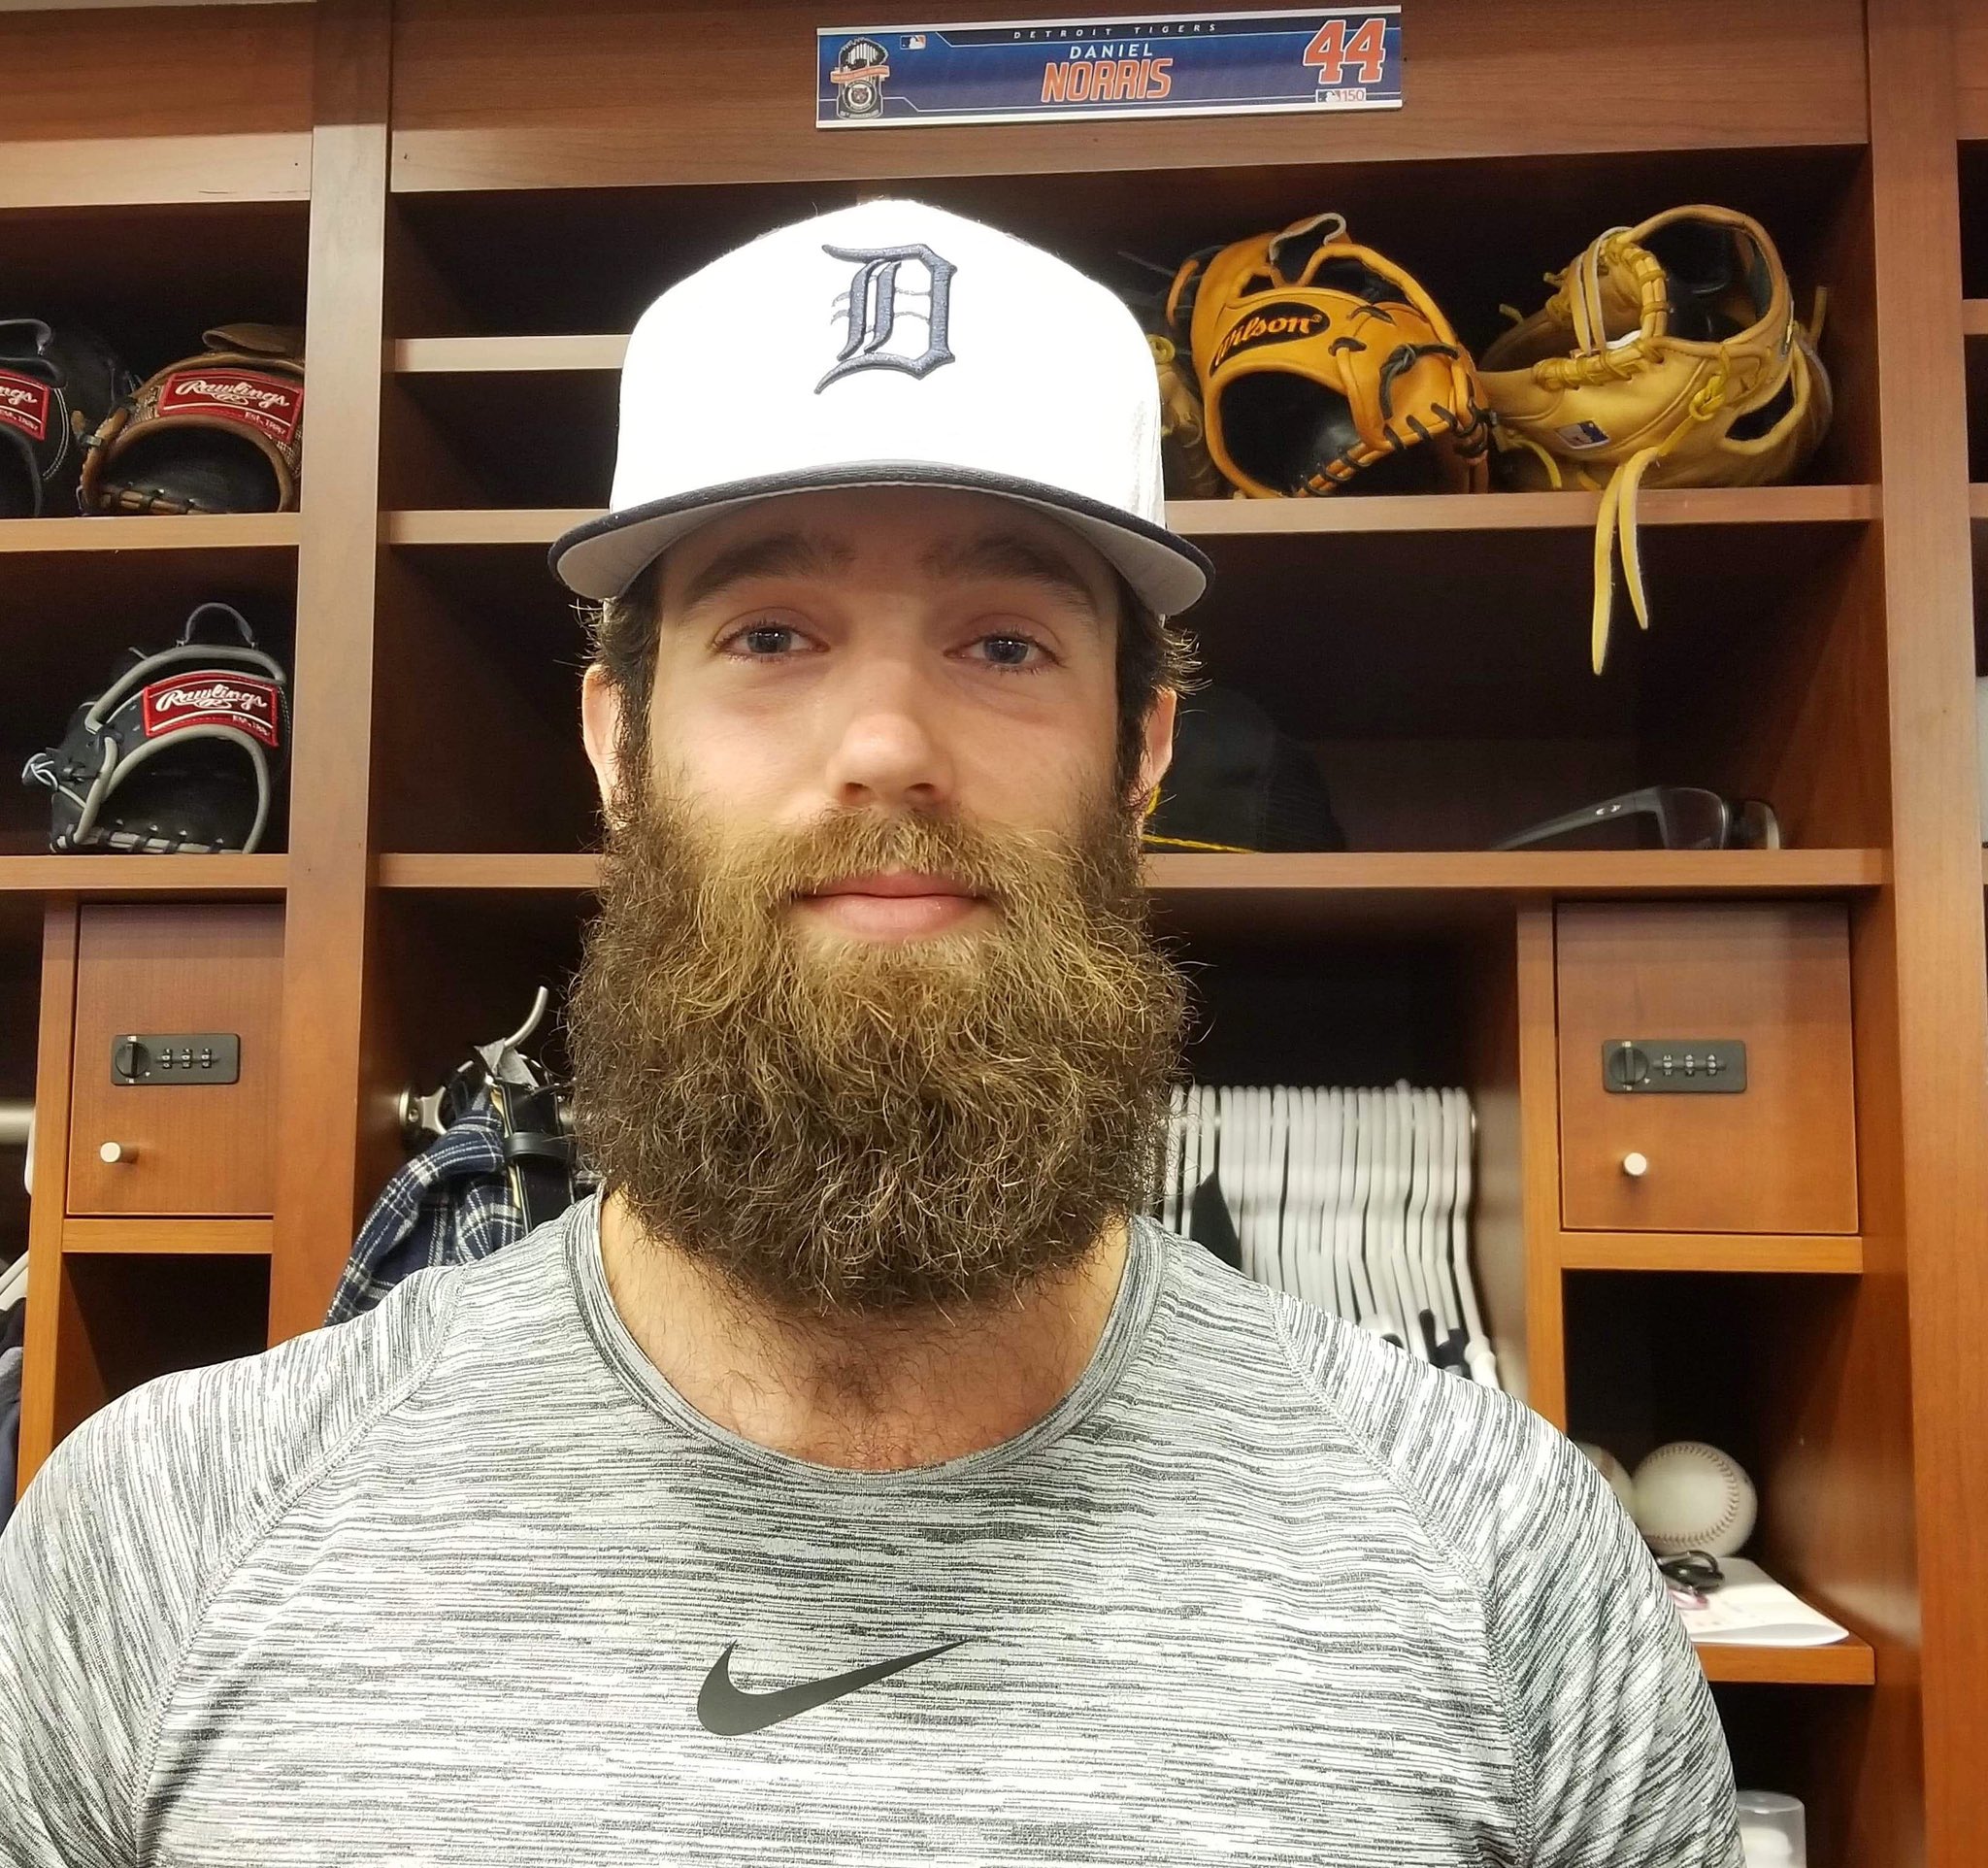 Daniel Norris finally shaved his beard and is now totally unrecognizable